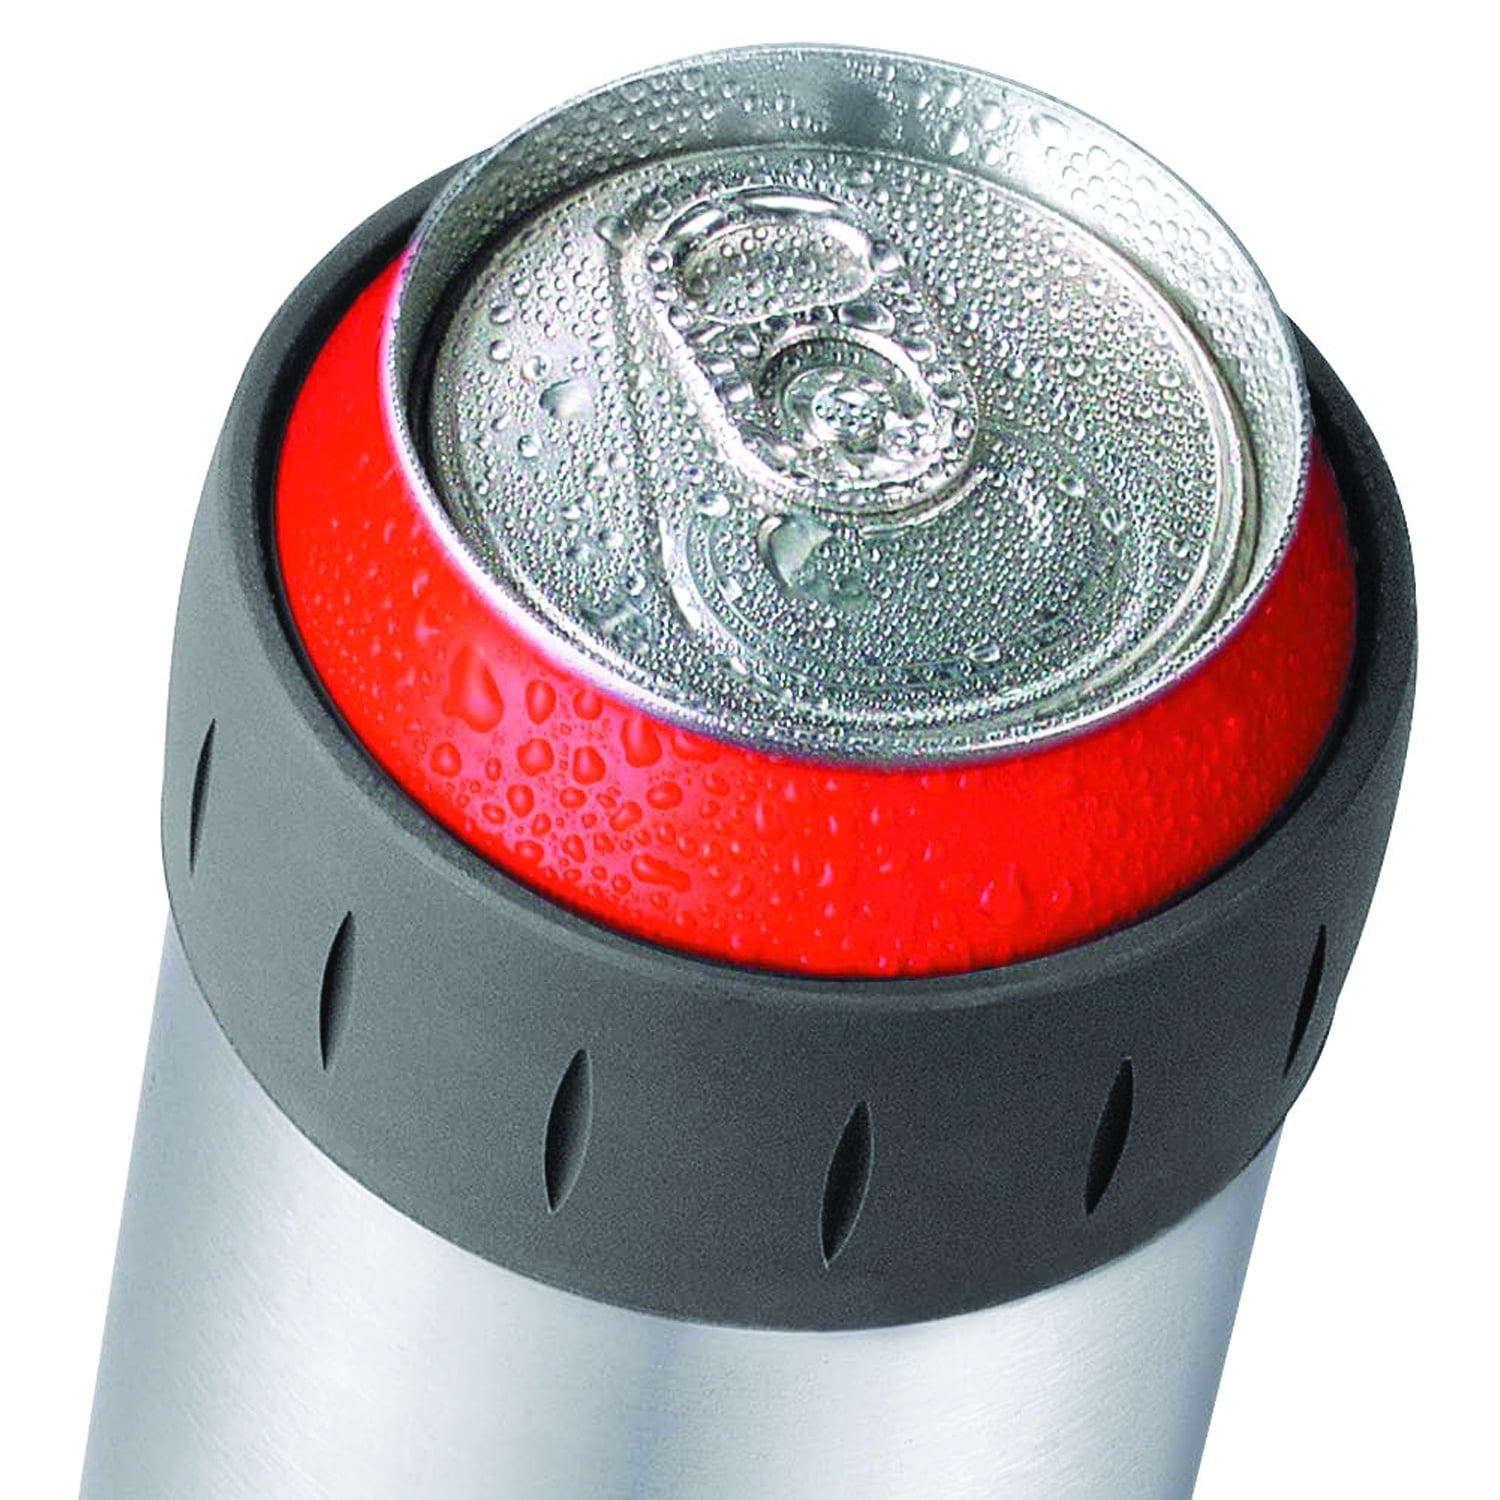 Thermos Beverage Can Insulator, Stainless Steel, 12-oz.